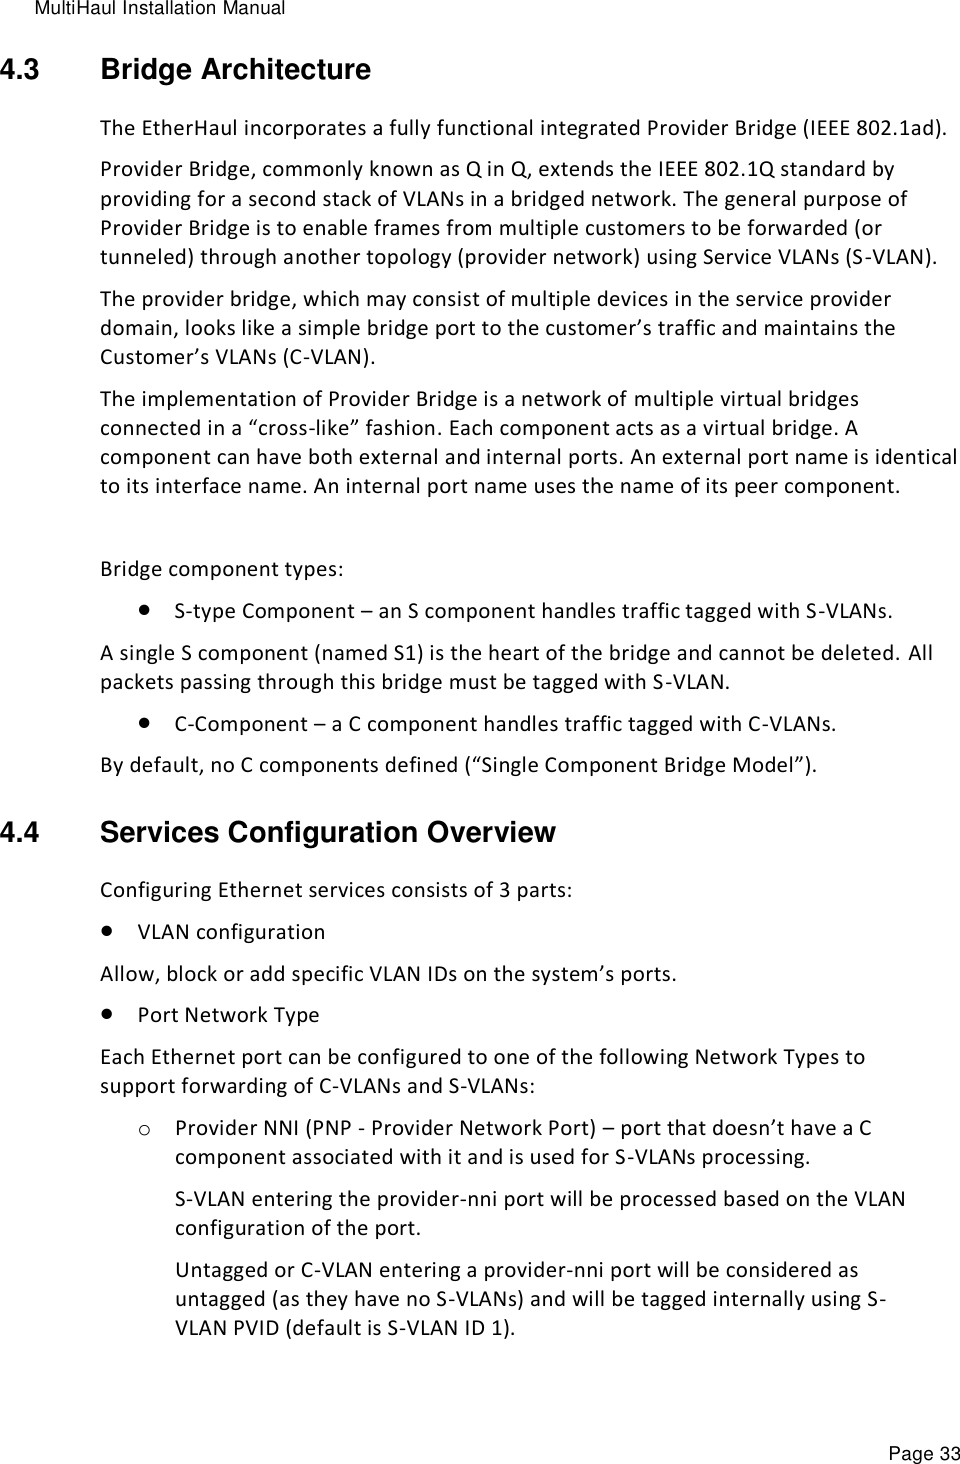 MultiHaul Installation Manual Page 33 4.3  Bridge Architecture The EtherHaul incorporates a fully functional integrated Provider Bridge (IEEE 802.1ad).  Provider Bridge, commonly known as Q in Q, extends the IEEE 802.1Q standard by providing for a second stack of VLANs in a bridged network. The general purpose of Provider Bridge is to enable frames from multiple customers to be forwarded (or tunneled) through another topology (provider network) using Service VLANs (S-VLAN).  The provider bridge, which may consist of multiple devices in the service provider domain, looks like a simple bridge port to the customer’s traffic and maintains the Customer’s VLANs (C-VLAN).  The implementation of Provider Bridge is a network of multiple virtual bridges connected in a “cross-like” fashion. Each component acts as a virtual bridge. A component can have both external and internal ports. An external port name is identical to its interface name. An internal port name uses the name of its peer component.  Bridge component types:  S-type Component – an S component handles traffic tagged with S-VLANs. A single S component (named S1) is the heart of the bridge and cannot be deleted.  All packets passing through this bridge must be tagged with S-VLAN.  C-Component – a C component handles traffic tagged with C-VLANs. By default, no C components defined (“Single Component Bridge Model”).  4.4  Services Configuration Overview Configuring Ethernet services consists of 3 parts:  VLAN configuration Allow, block or add specific VLAN IDs on the system’s ports.  Port Network Type   Each Ethernet port can be configured to one of the following Network Types to support forwarding of C-VLANs and S-VLANs: o Provider NNI (PNP - Provider Network Port) – port that doesn’t have a C component associated with it and is used for S-VLANs processing. S-VLAN entering the provider-nni port will be processed based on the VLAN configuration of the port. Untagged or C-VLAN entering a provider-nni port will be considered as untagged (as they have no S-VLANs) and will be tagged internally using S-VLAN PVID (default is S-VLAN ID 1). 